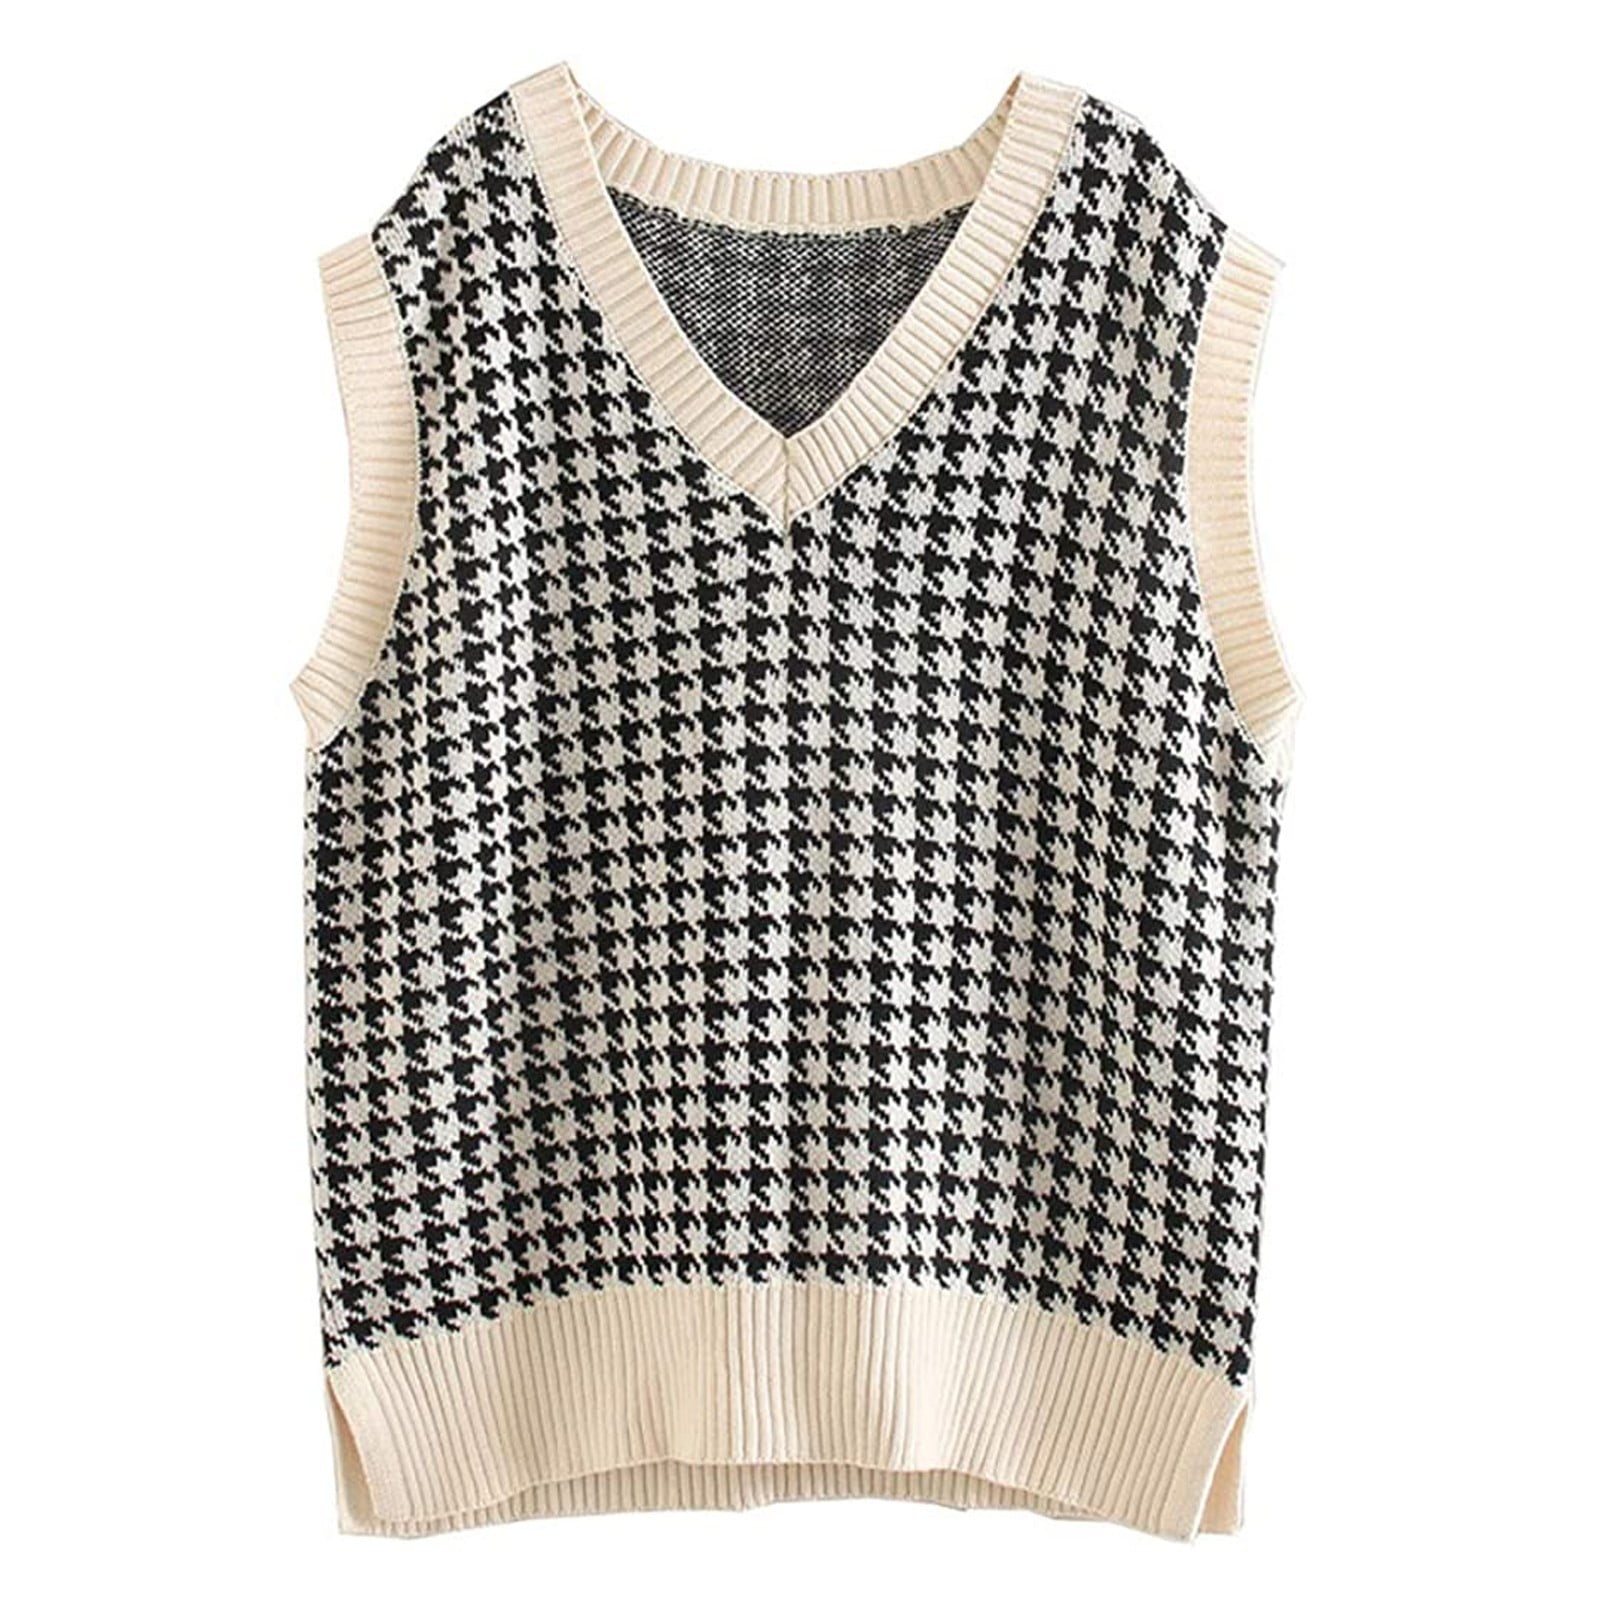 Women's Sweater Vests Casual V-Neck Pullover Shirt Collision Color ...